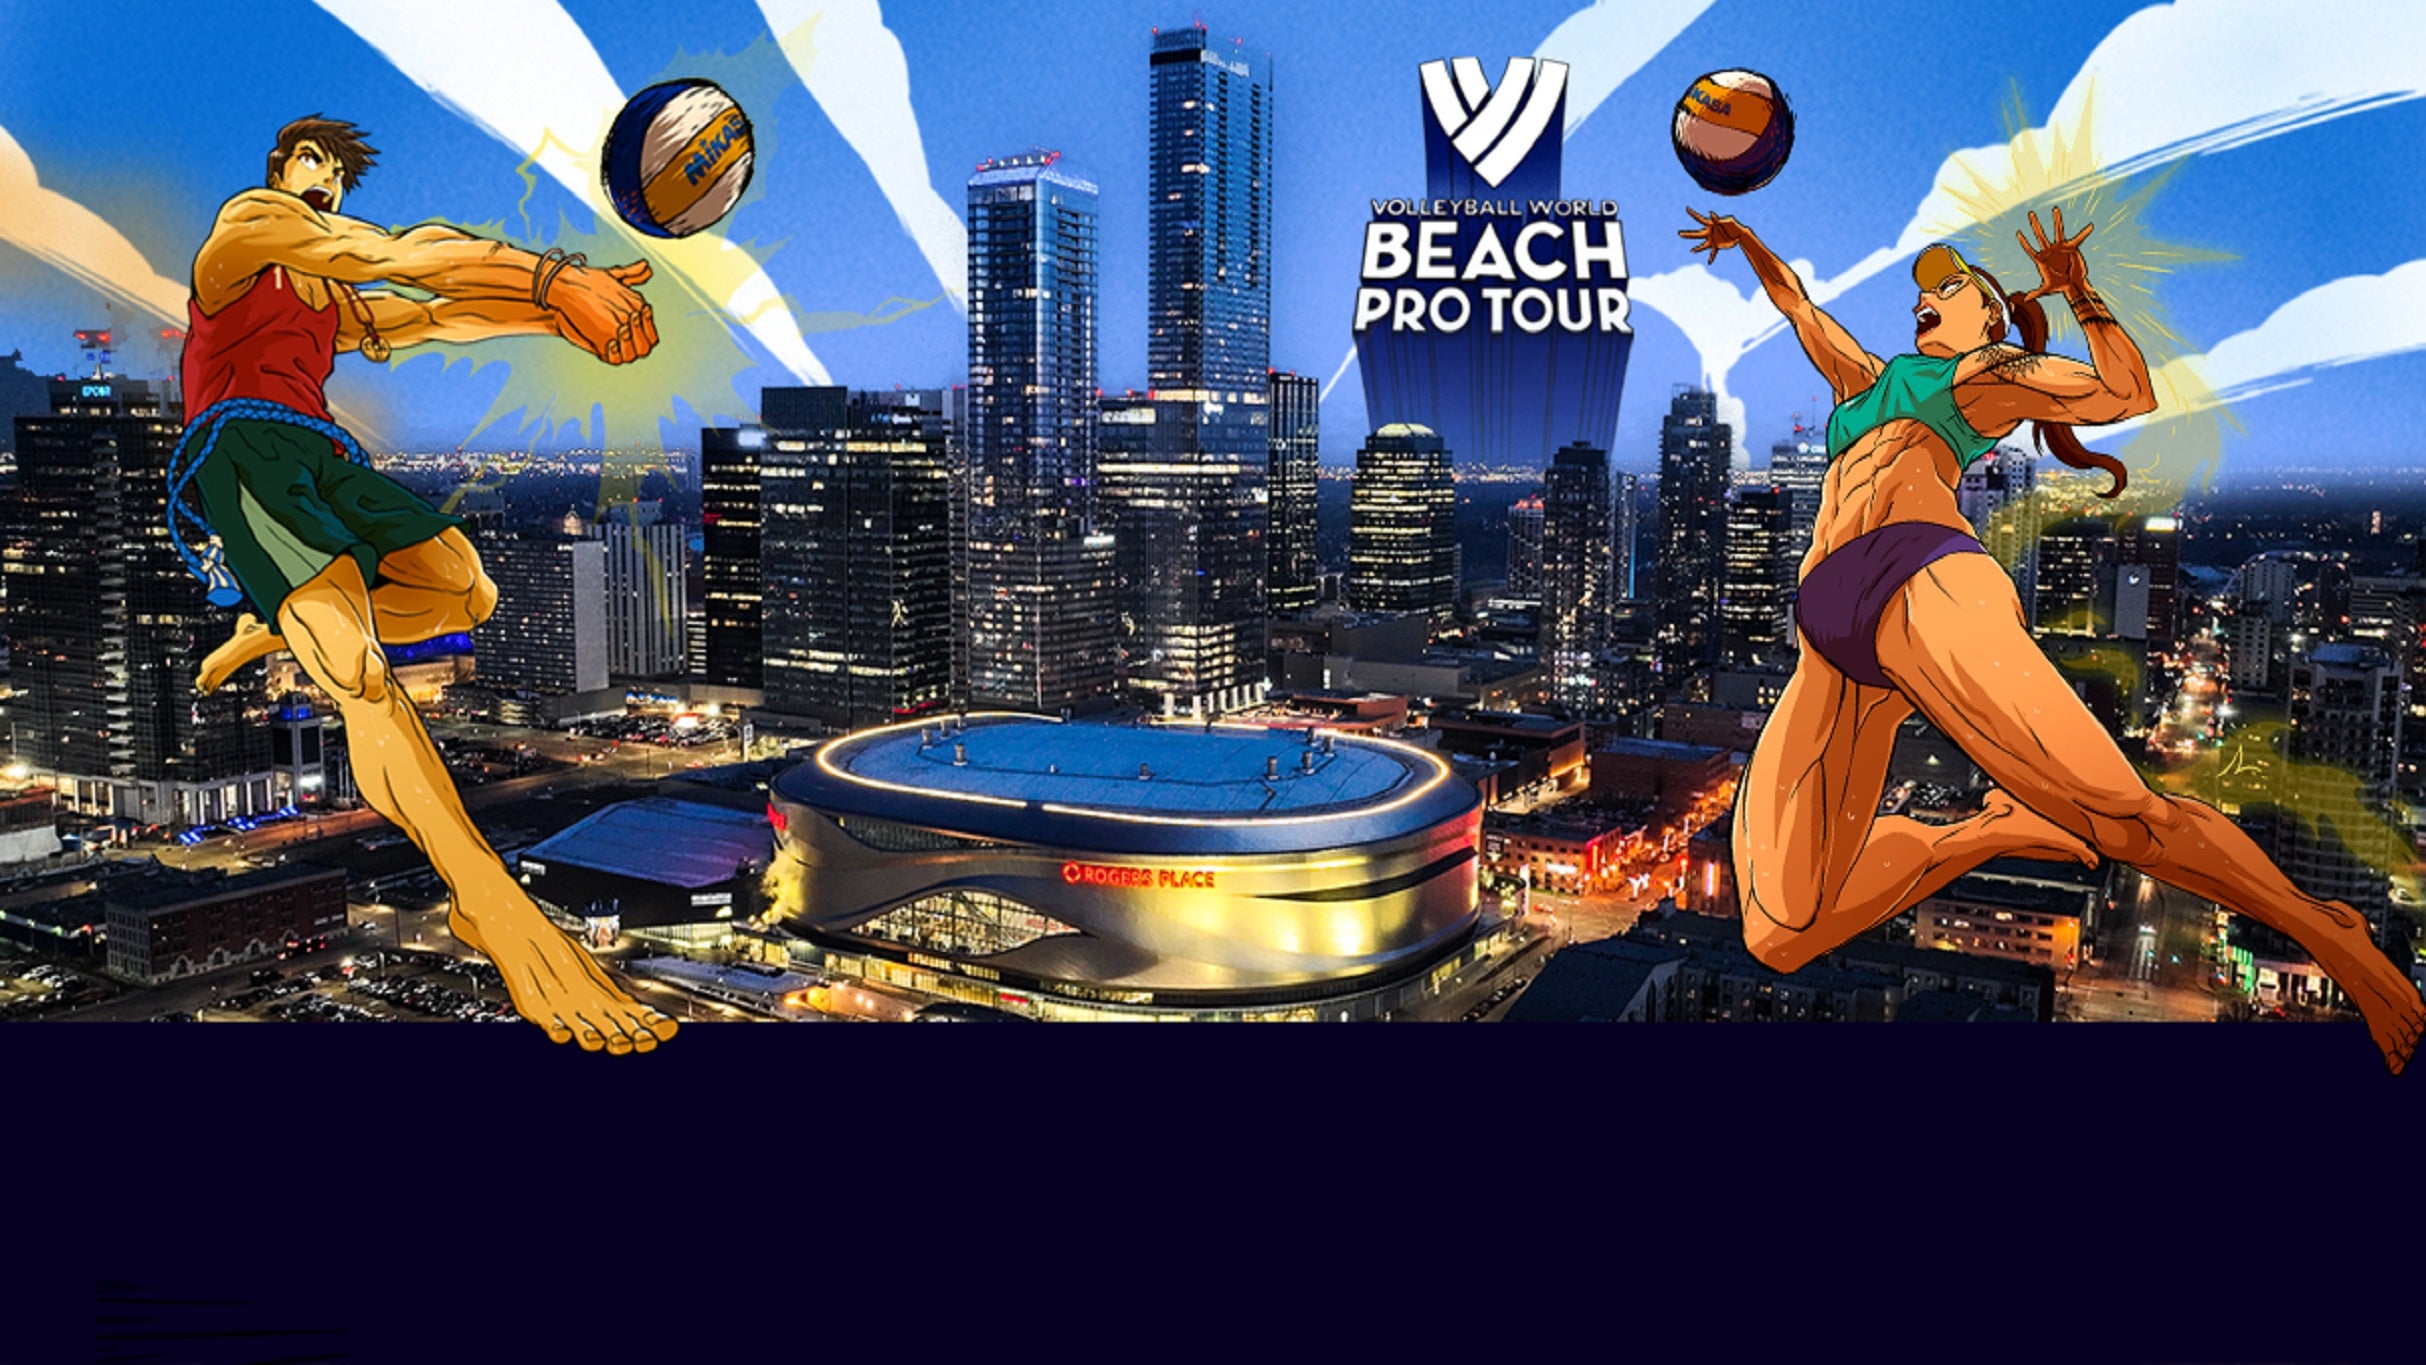 2023 Beach Pro Tour Challenge - Weekend Pass in Edmonton promo photo for Exclusive presale offer code